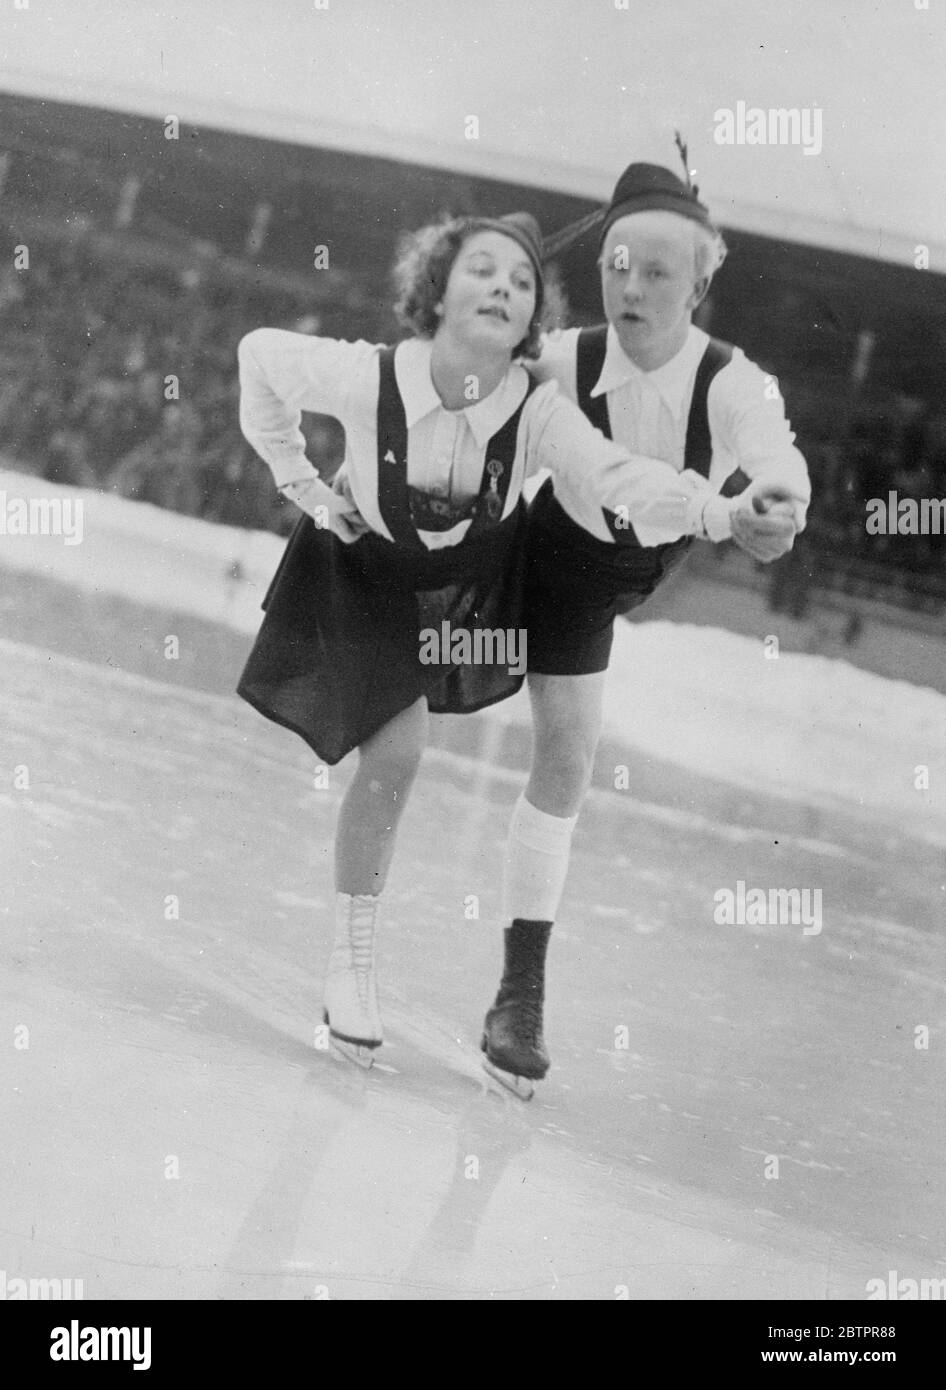 Tyrolean dance on the ice. Gunnel Ericsson (left ) and Bo Mothander, Sweden's most promising girl and boy, skaters, performing aTyrolean dance on the ice at the Stockholm Stadium, where they are training hard for the world Championships. They already hold the Swedish pair skating championship. 27 January 1938 Stock Photo